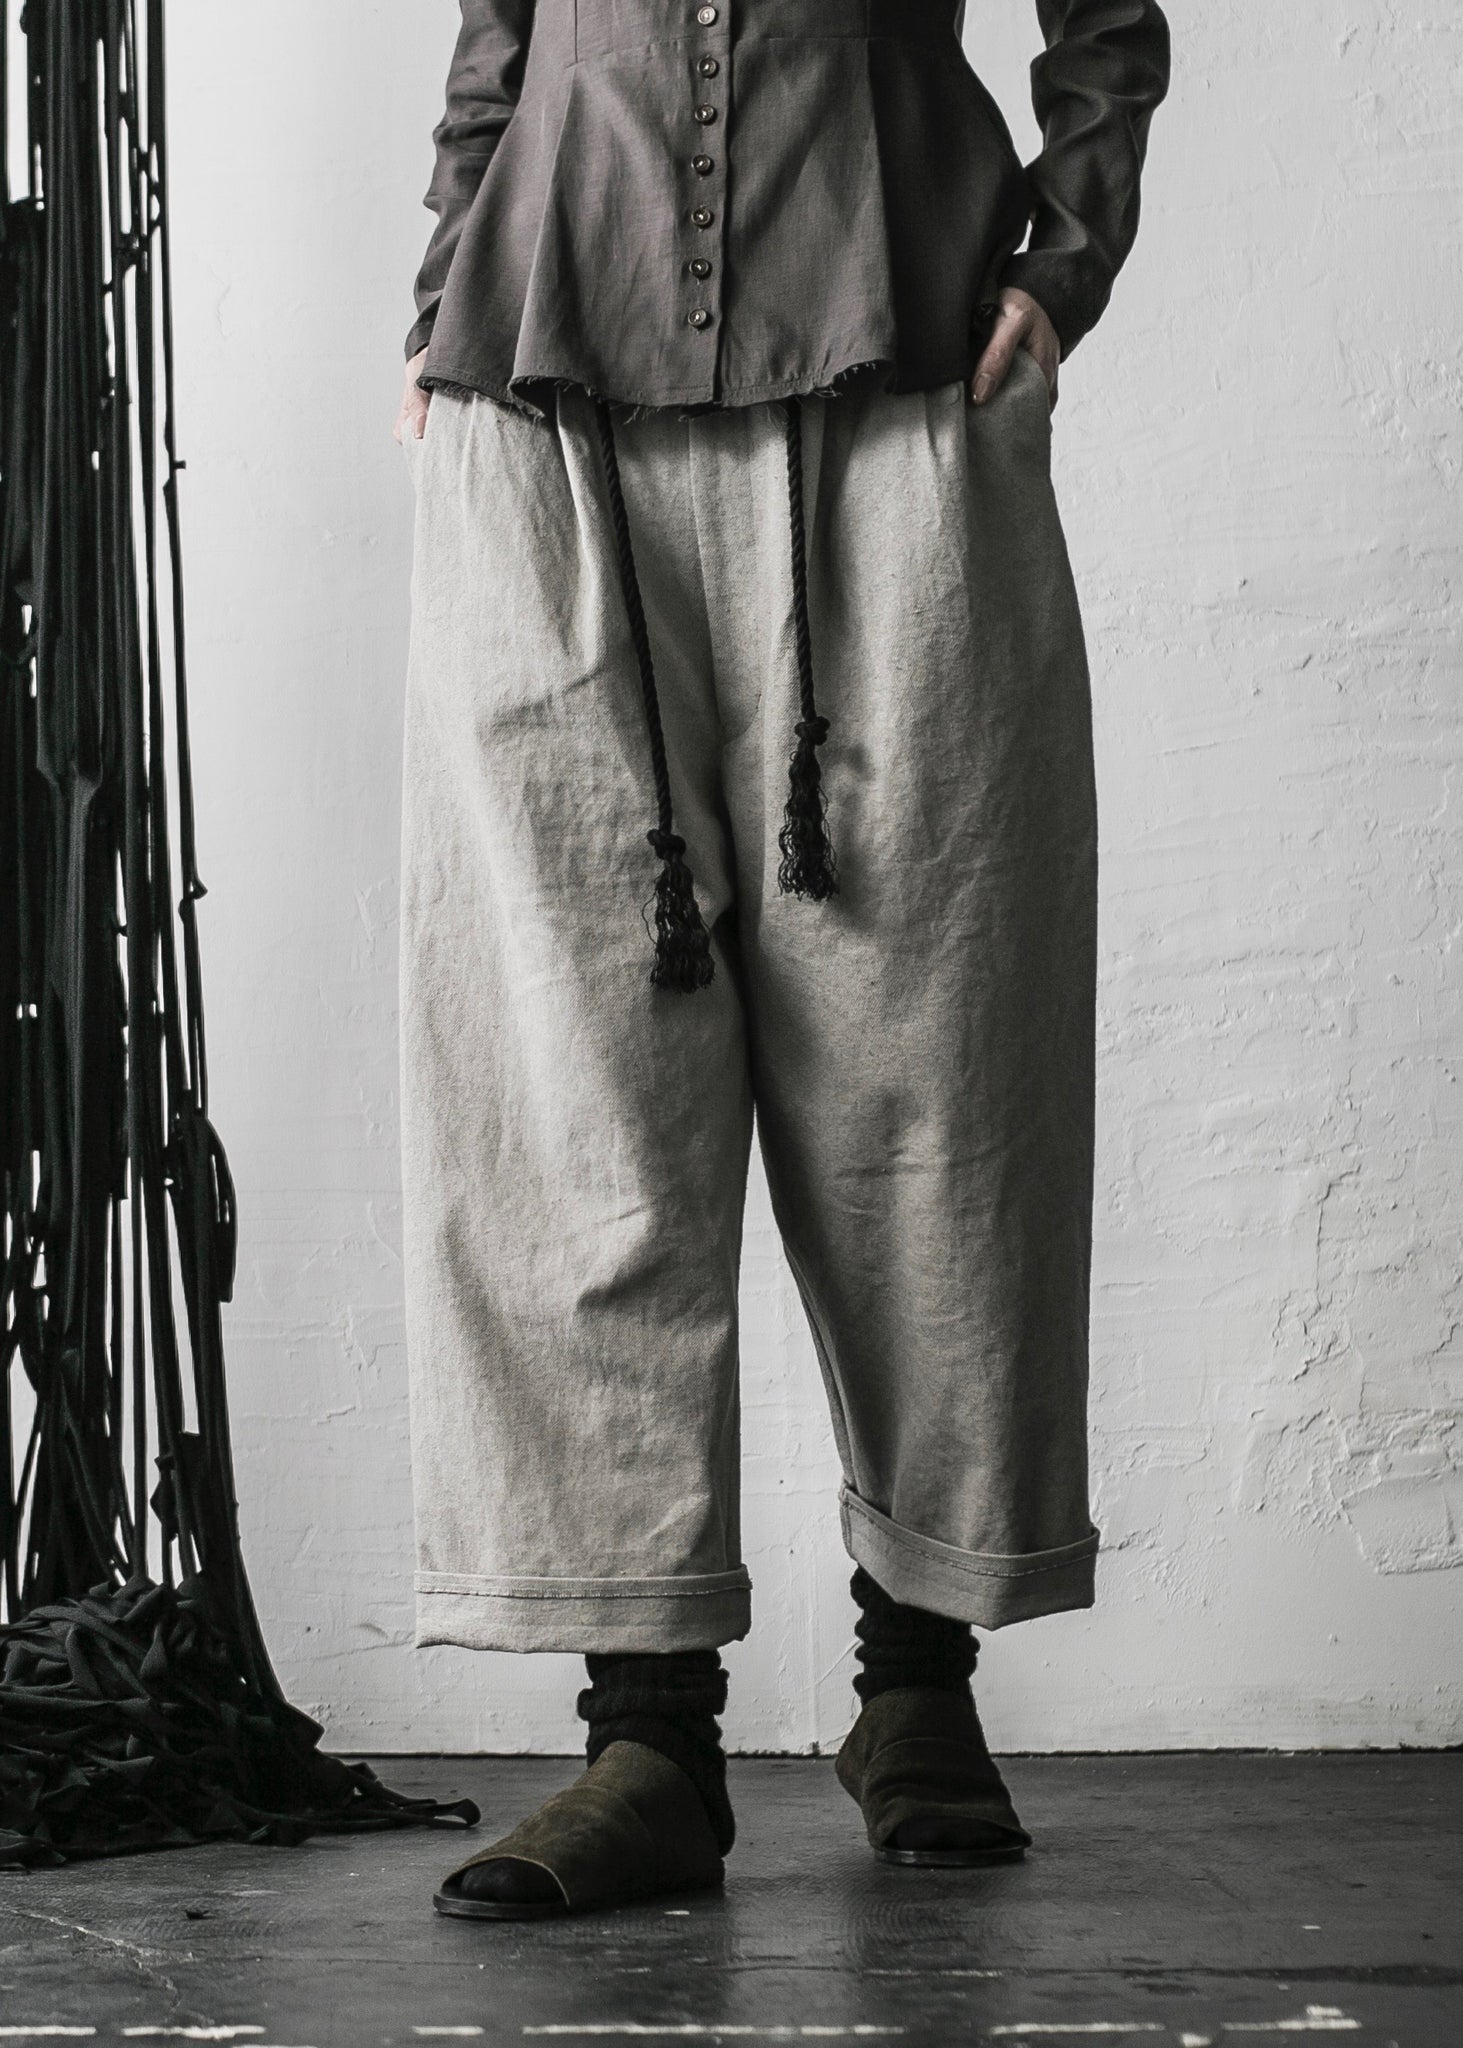 WIDE STRAIGHT PANTS